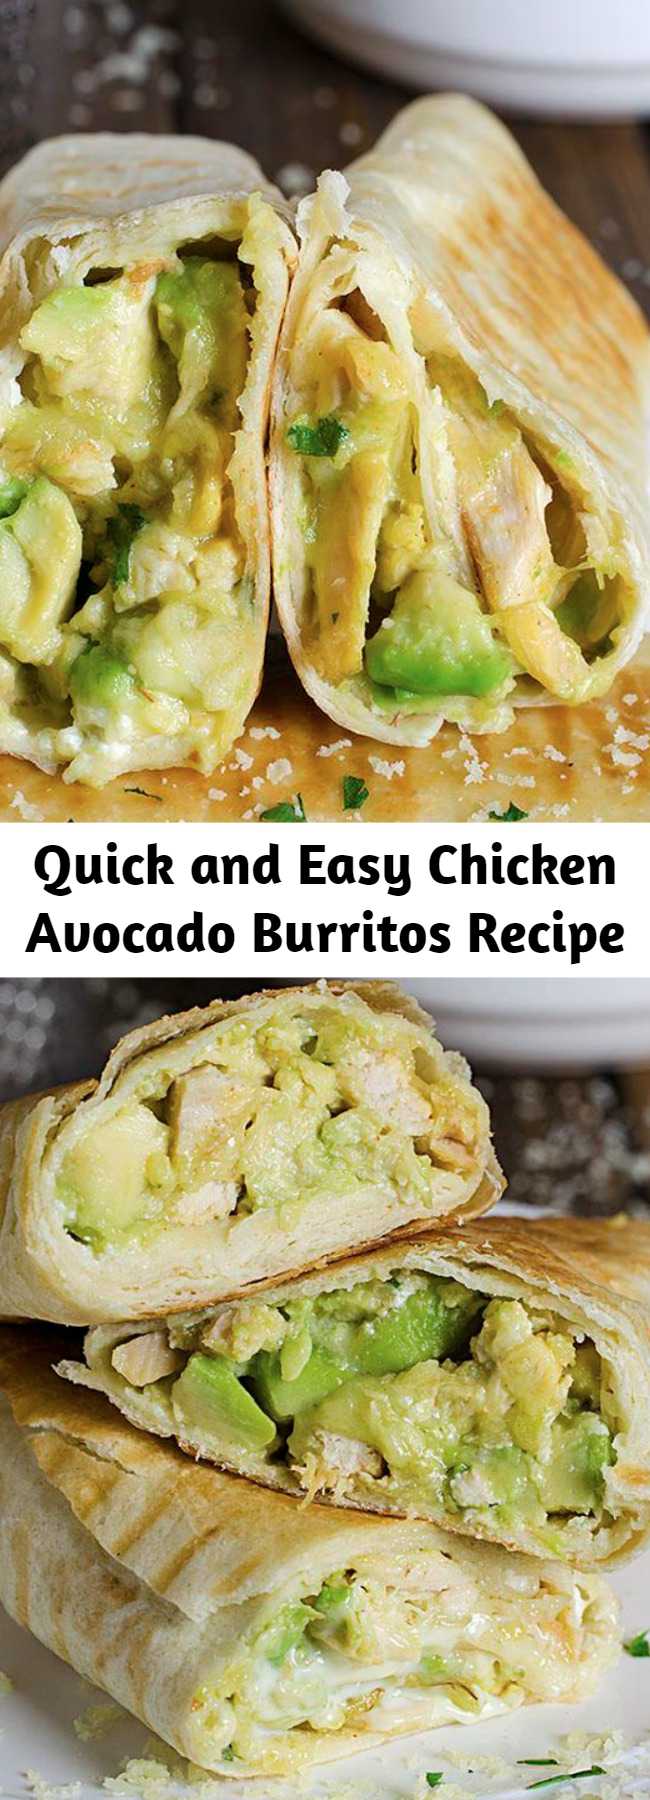 Quick and Easy Chicken Avocado Burritos Recipe - Looking for quick and easy dinner recipes? This Chicken Avocado Burritos come together with just 15 min prep! If you are in a big hurry to prepare a beautiful lunch or dinner, maybe it’s time for you to try the healthy and easy Chicken Avocado Burritos. I consider this a real trick up my sleeve for situations like this just like this Chicken Avocado Salad Roll Ups. #healthydinnerrecipes #easyrecipes #chickenavocado